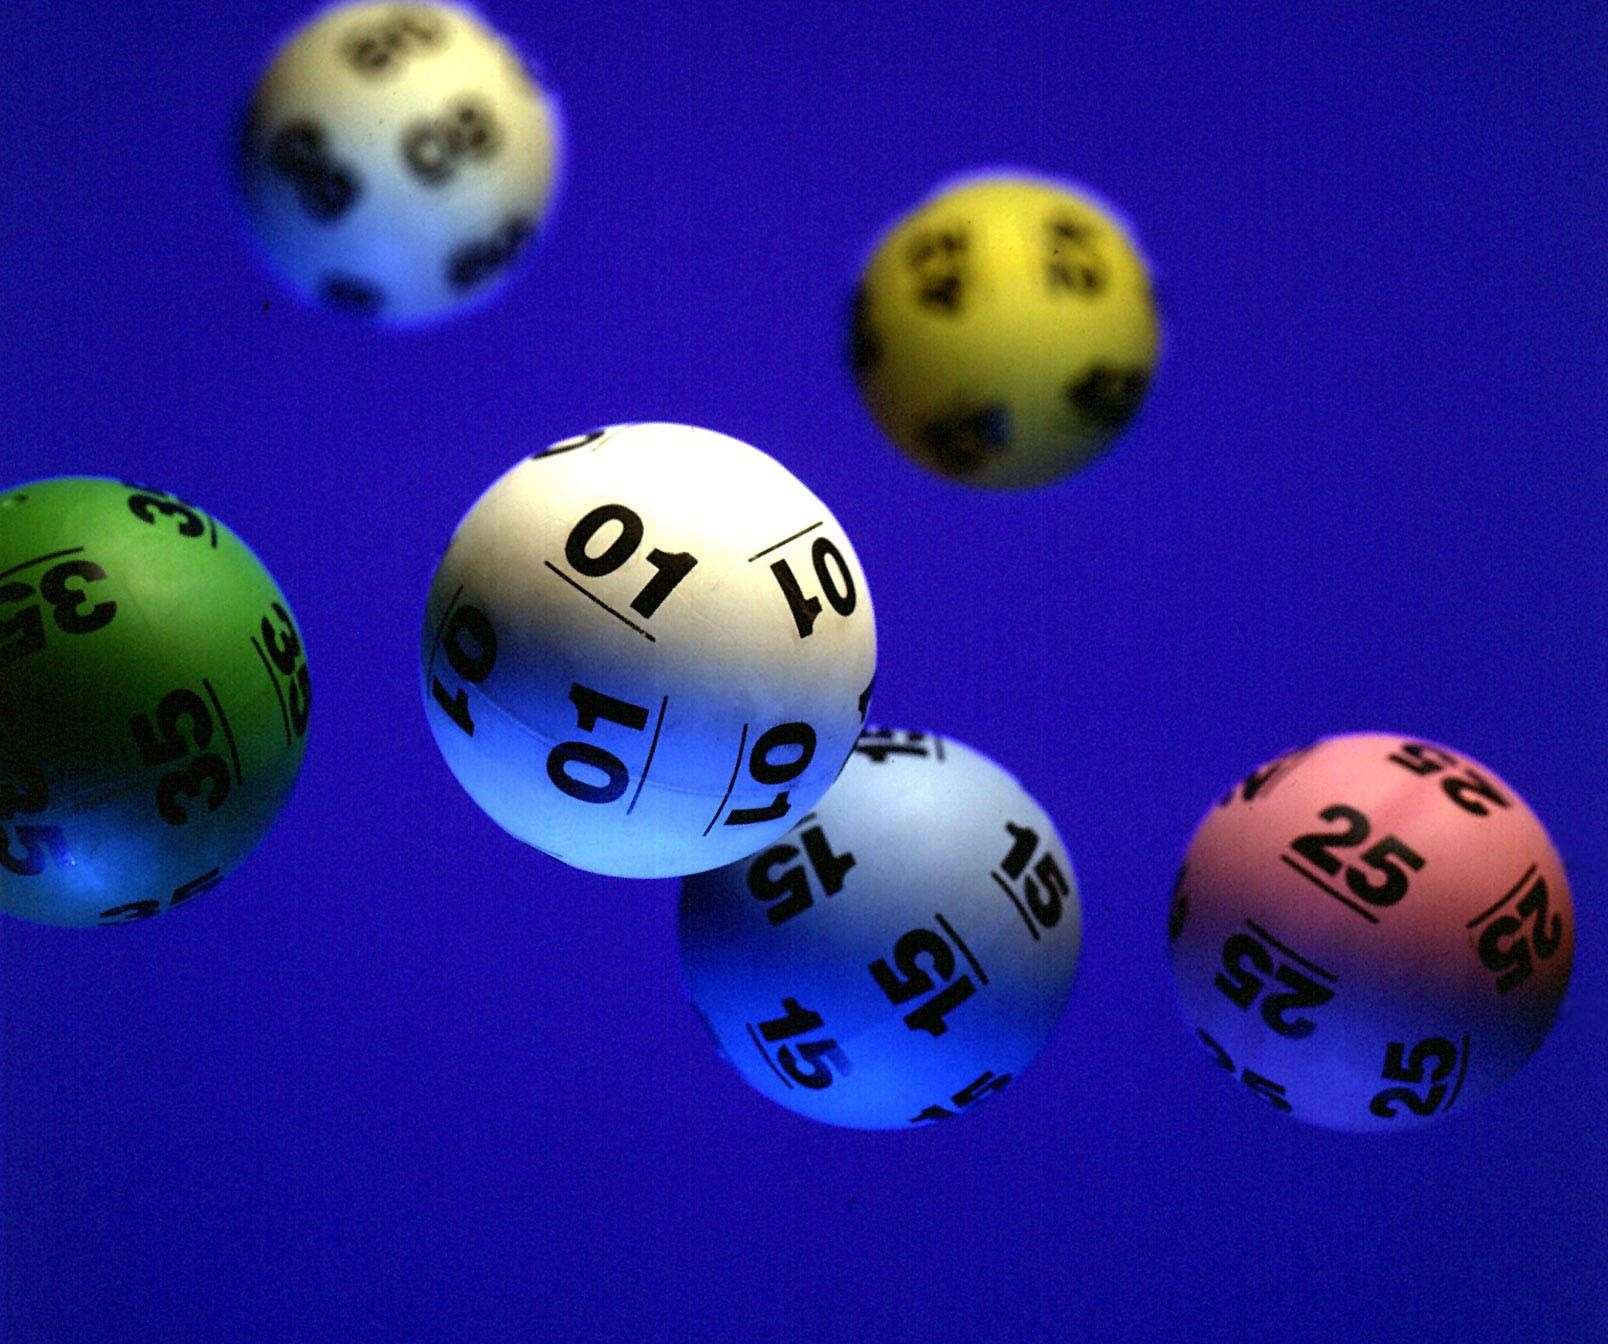 A mystery man from Kent has become a millionaire overnight after winning a National Lottery draw